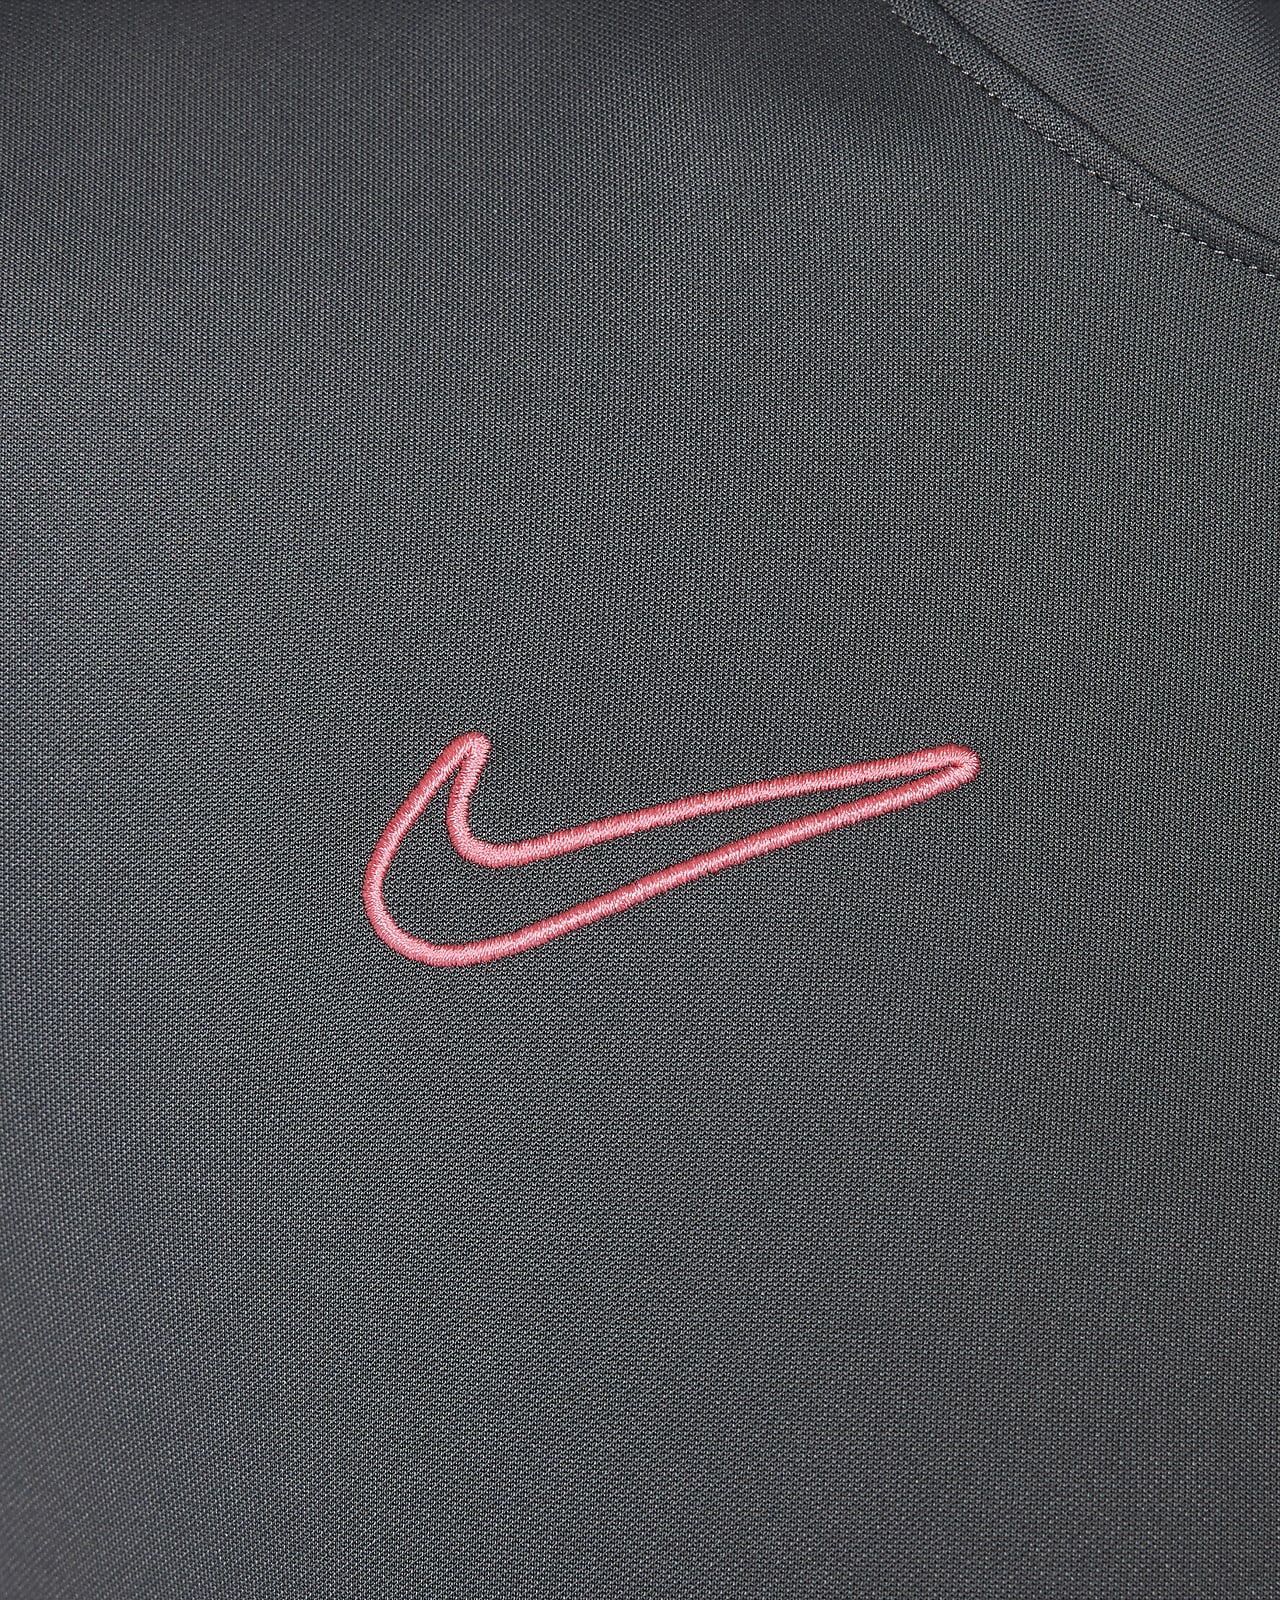 NIKE ACADEMY DRI-FIT DRILL TOP-RED/ANTHRACITE/WHITE